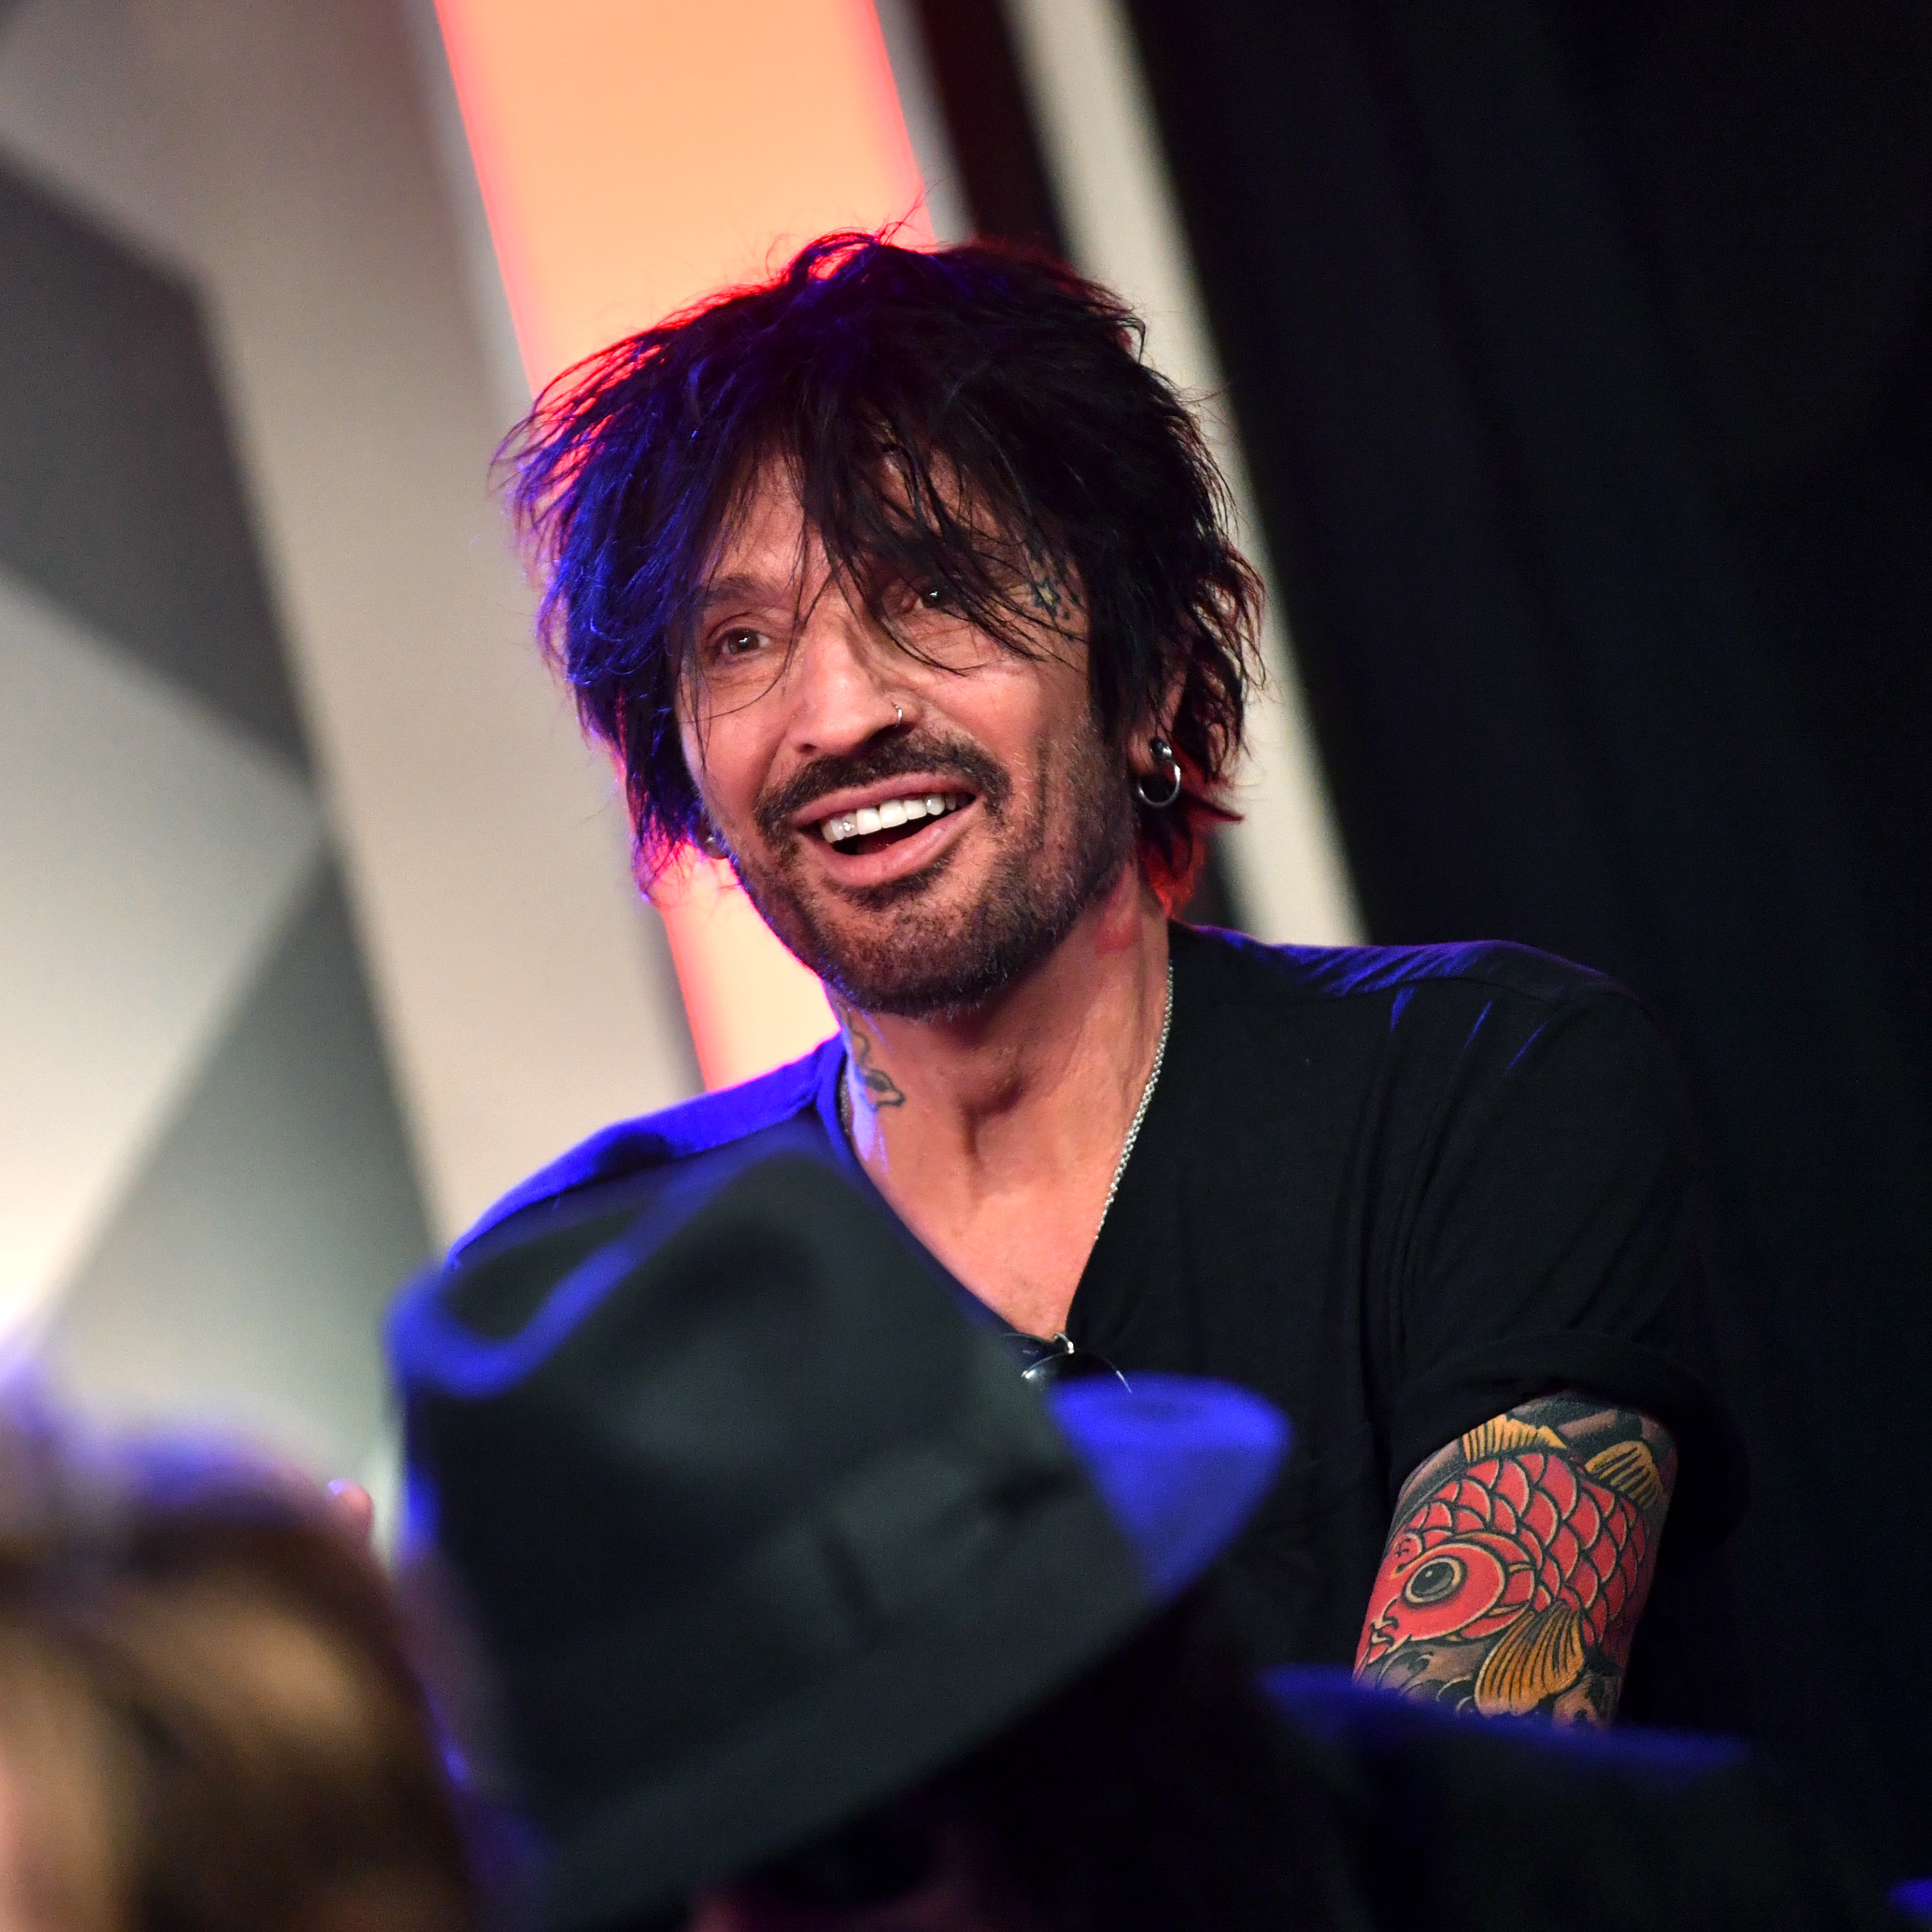 Tommy Lee speaks during the press conference for The Stadium Tour with Def Leppard, Mötley Crüe, and Poison bands at SiriusXM Studios on December 4, 2019, in Los Angeles, California. | Source: Getty Images